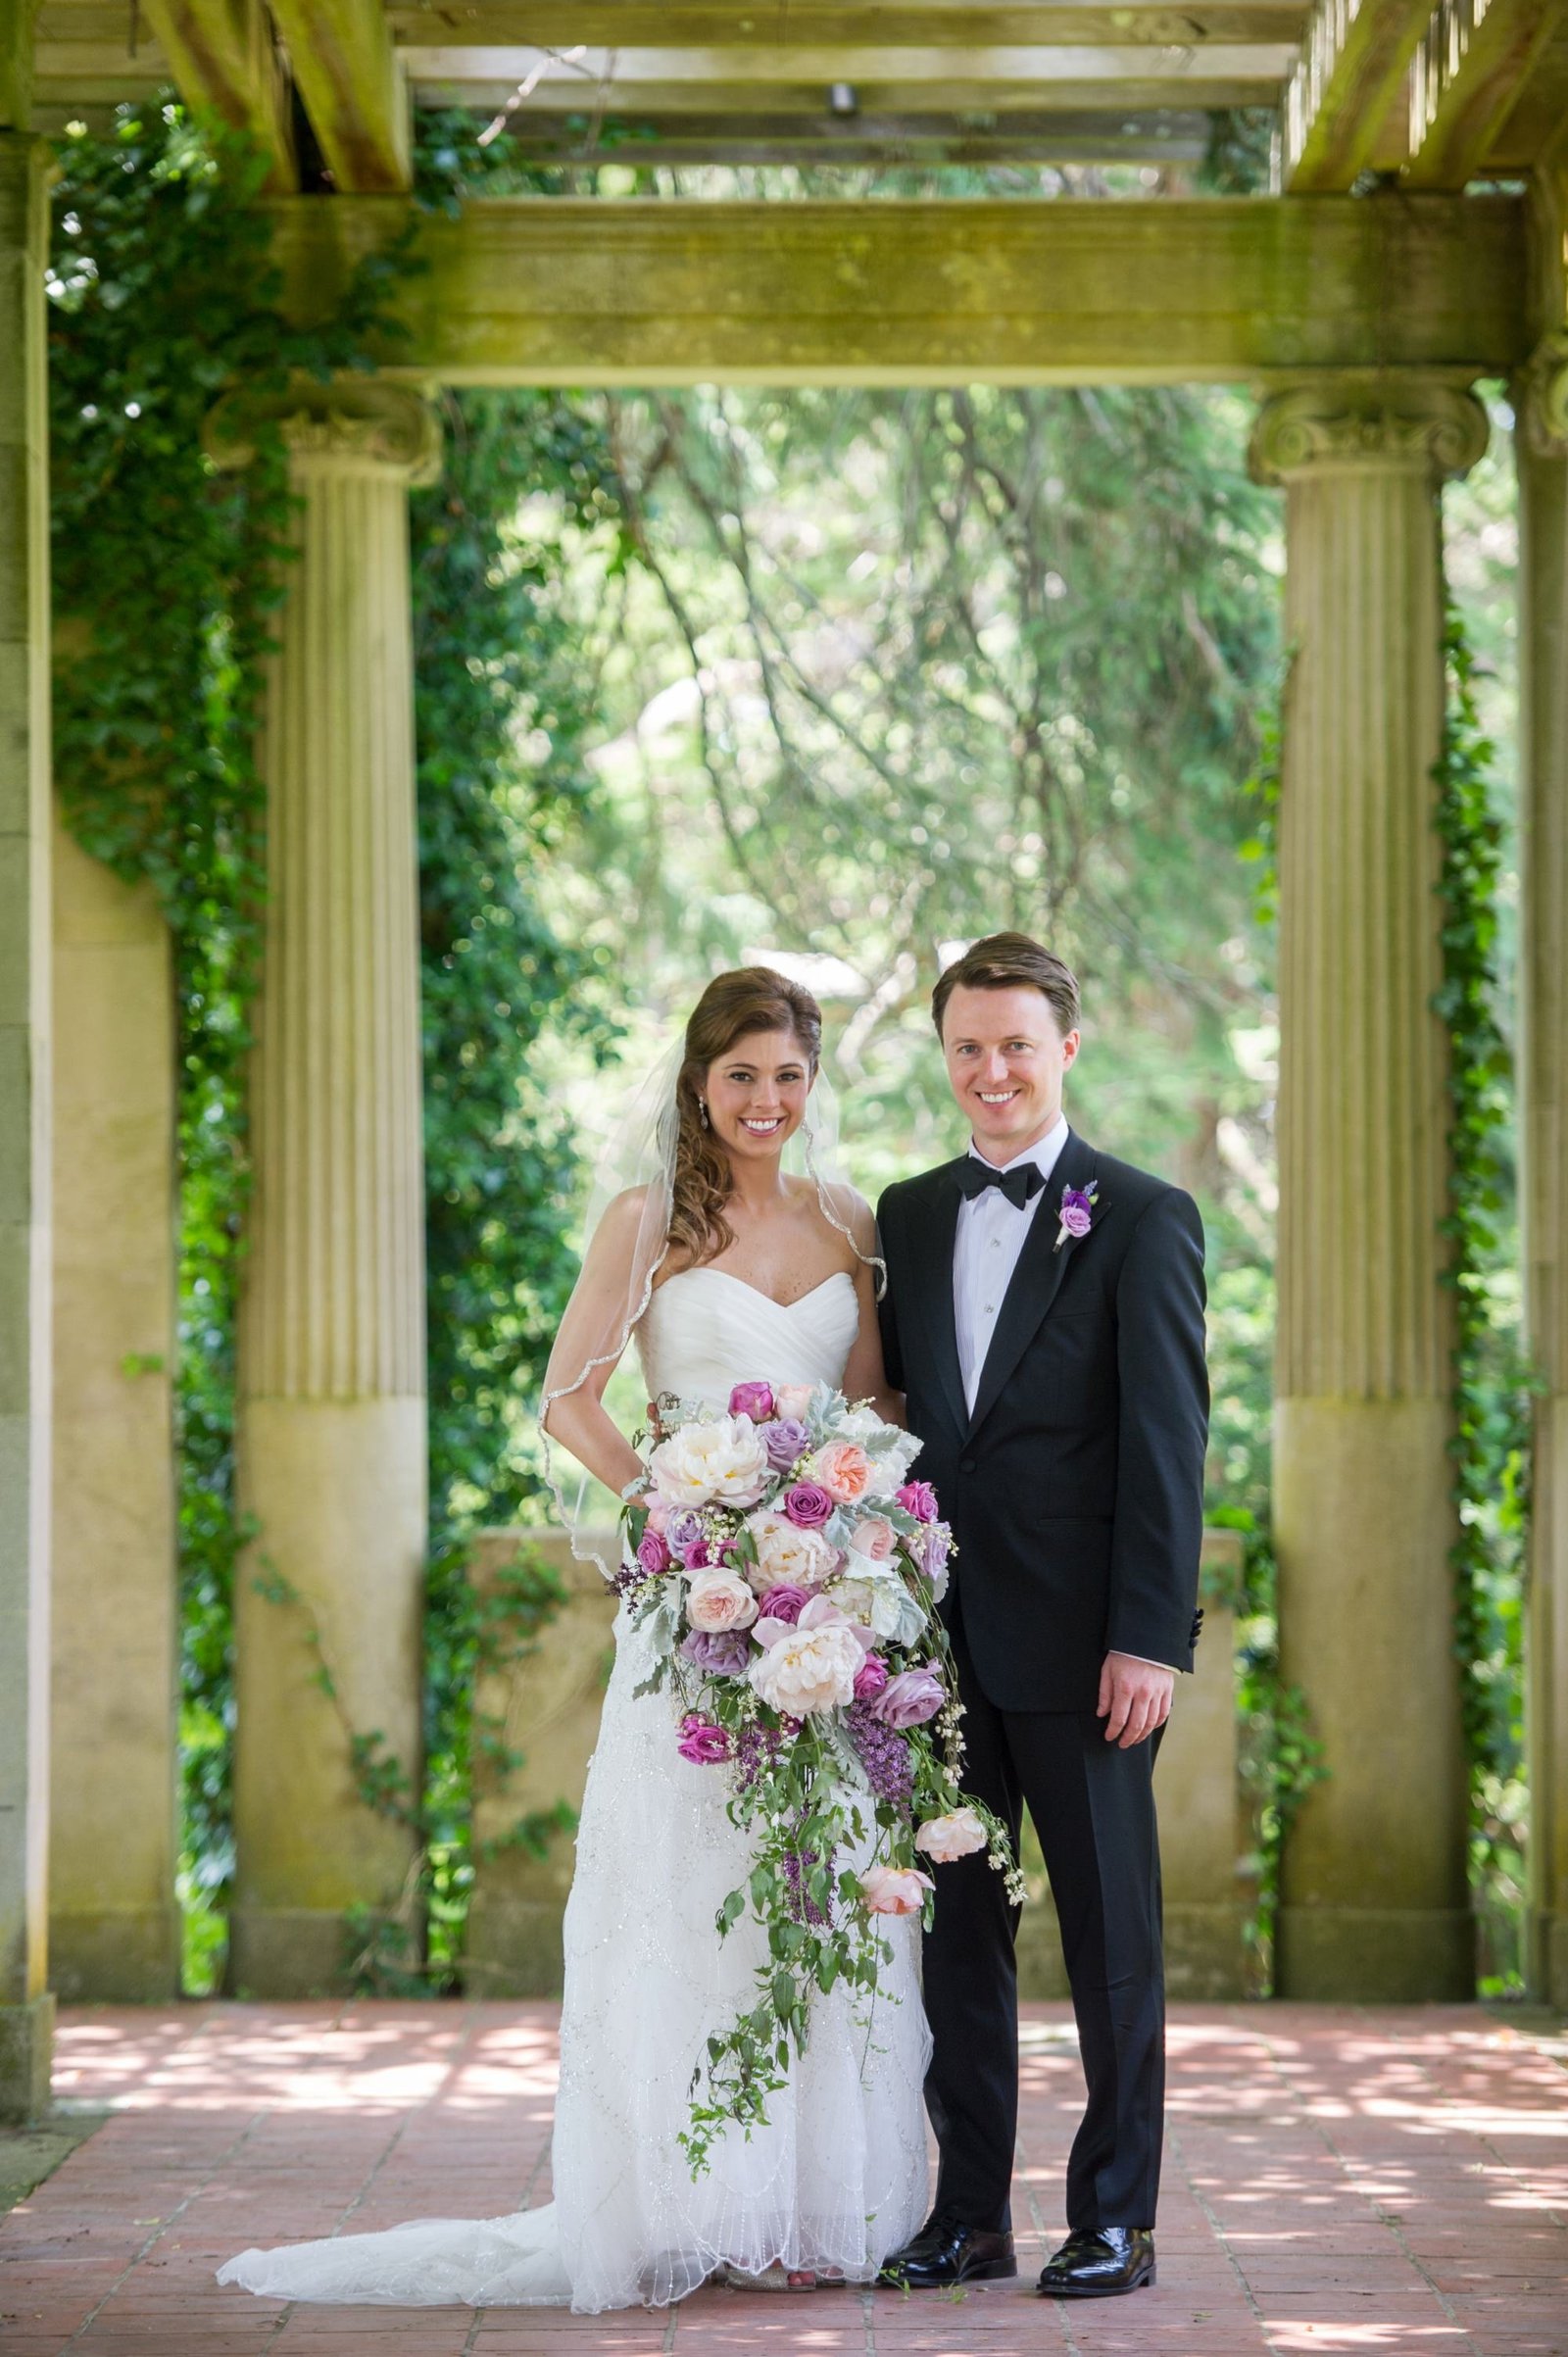 Gatsby themed wedding in purple and blush at The Branford House in Groton, CT